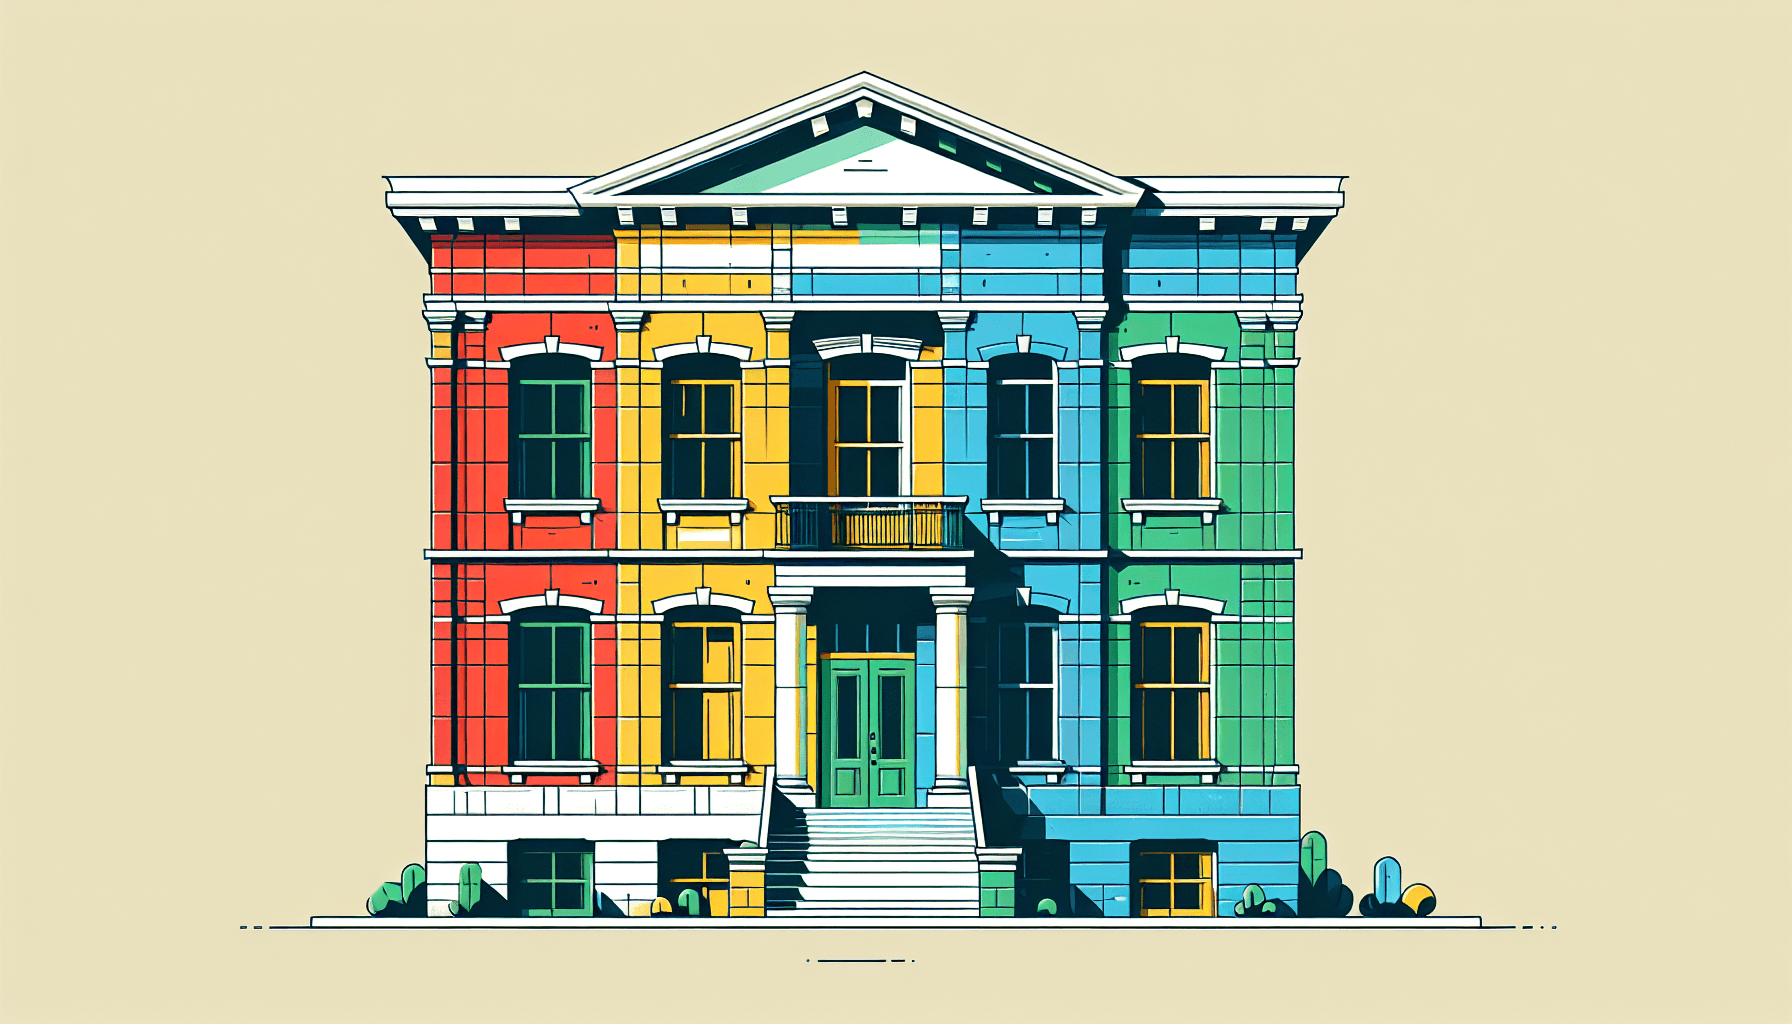 Building set in flat illustration style and white background, red #f47574, green #88c7a8, yellow #fcc44b, and blue #645bc8 colors.